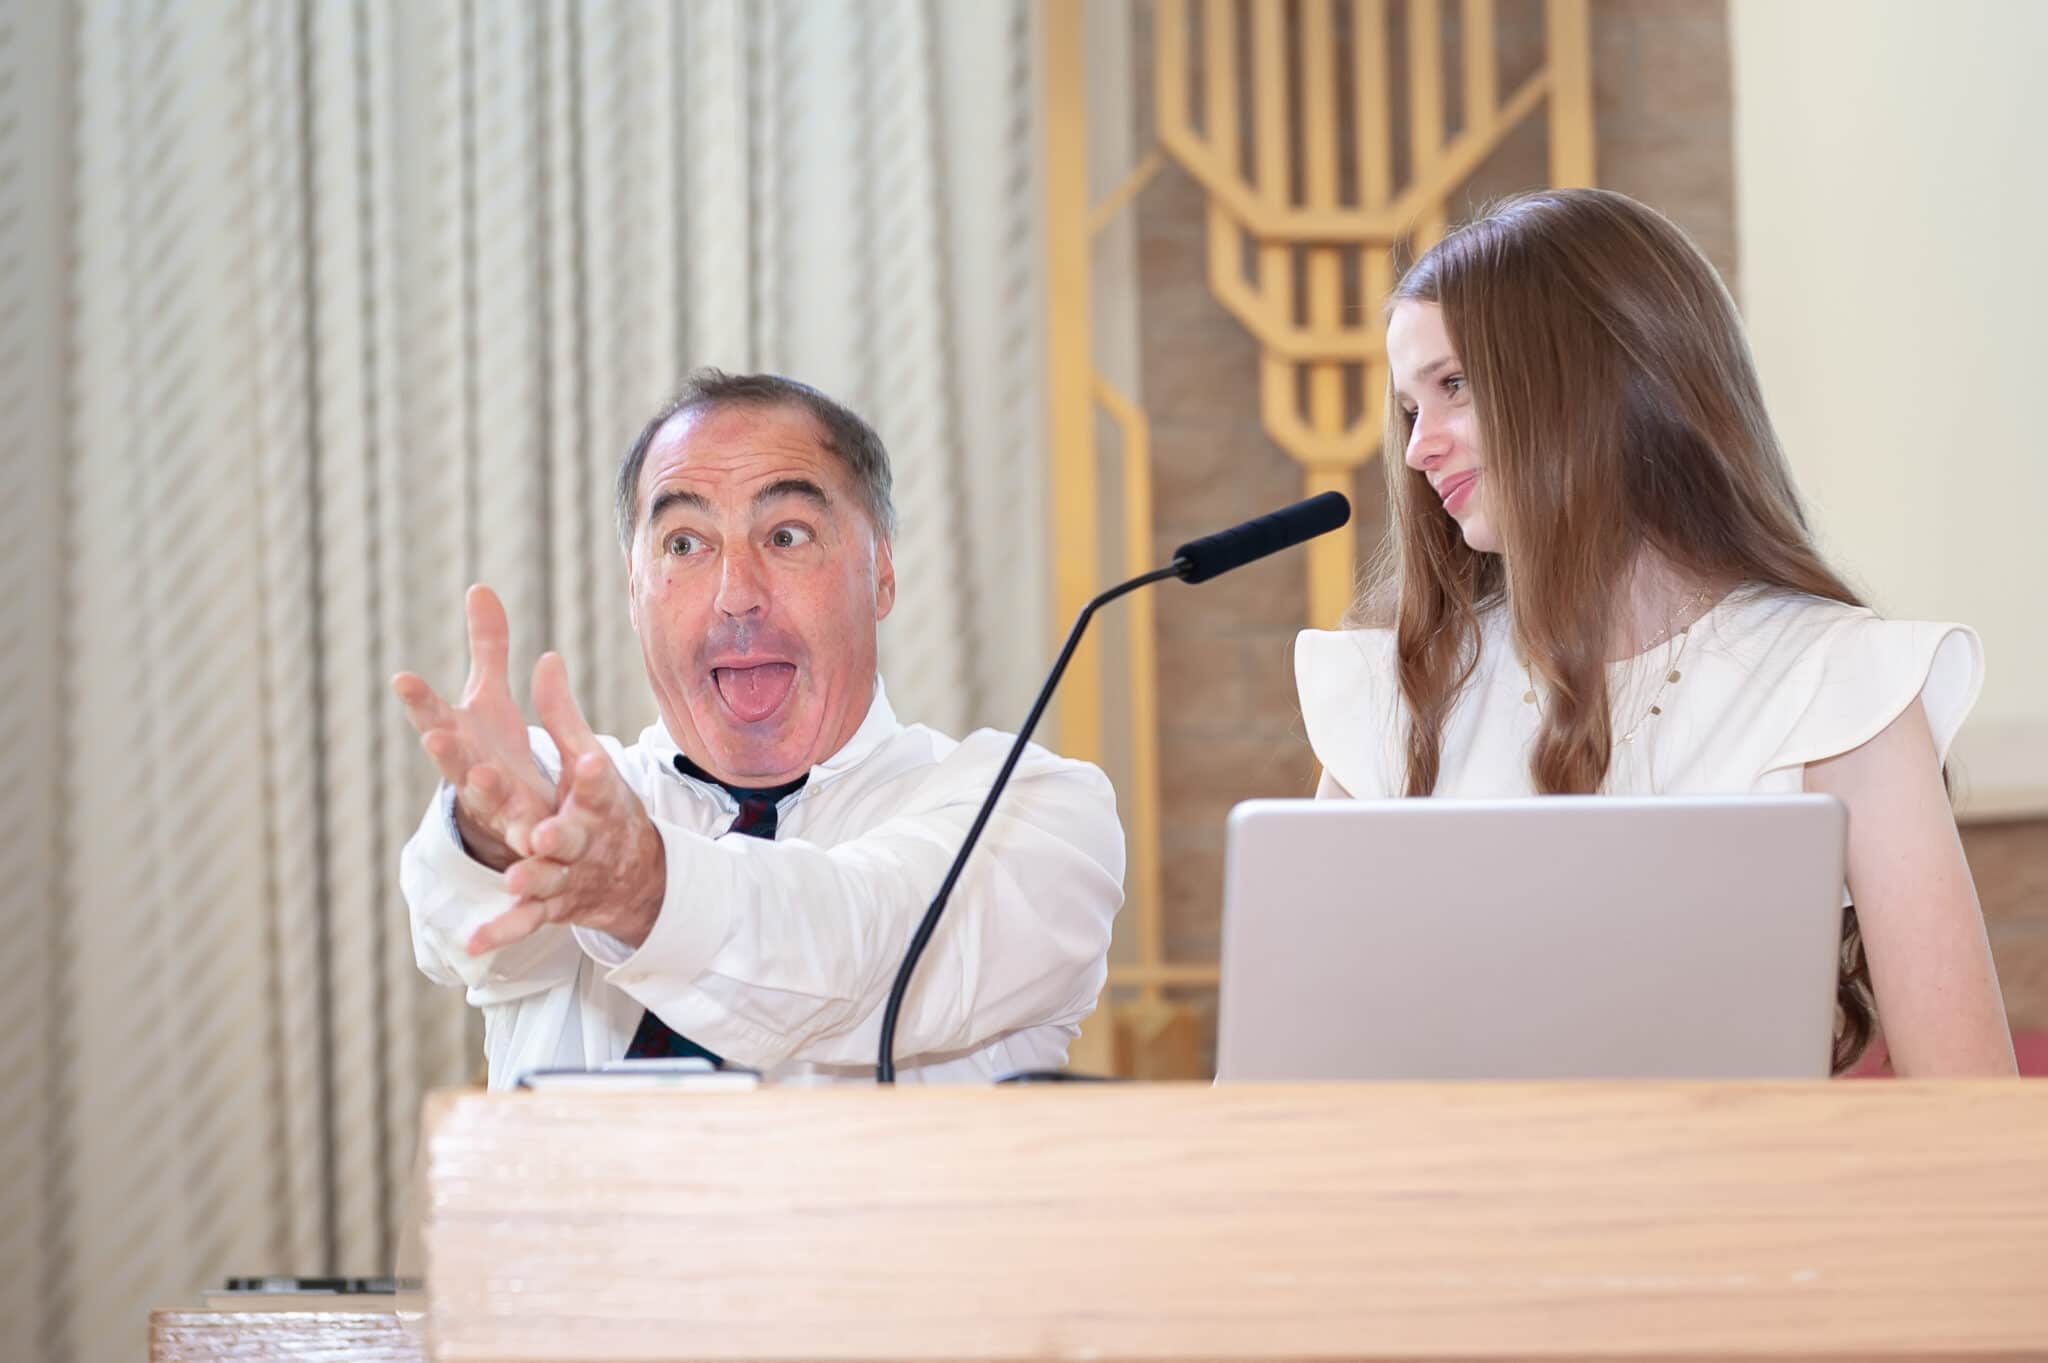 A young girl looks on as her mentor gestures that she project her voice more during her bat mitzvah rehearsal in Denver.